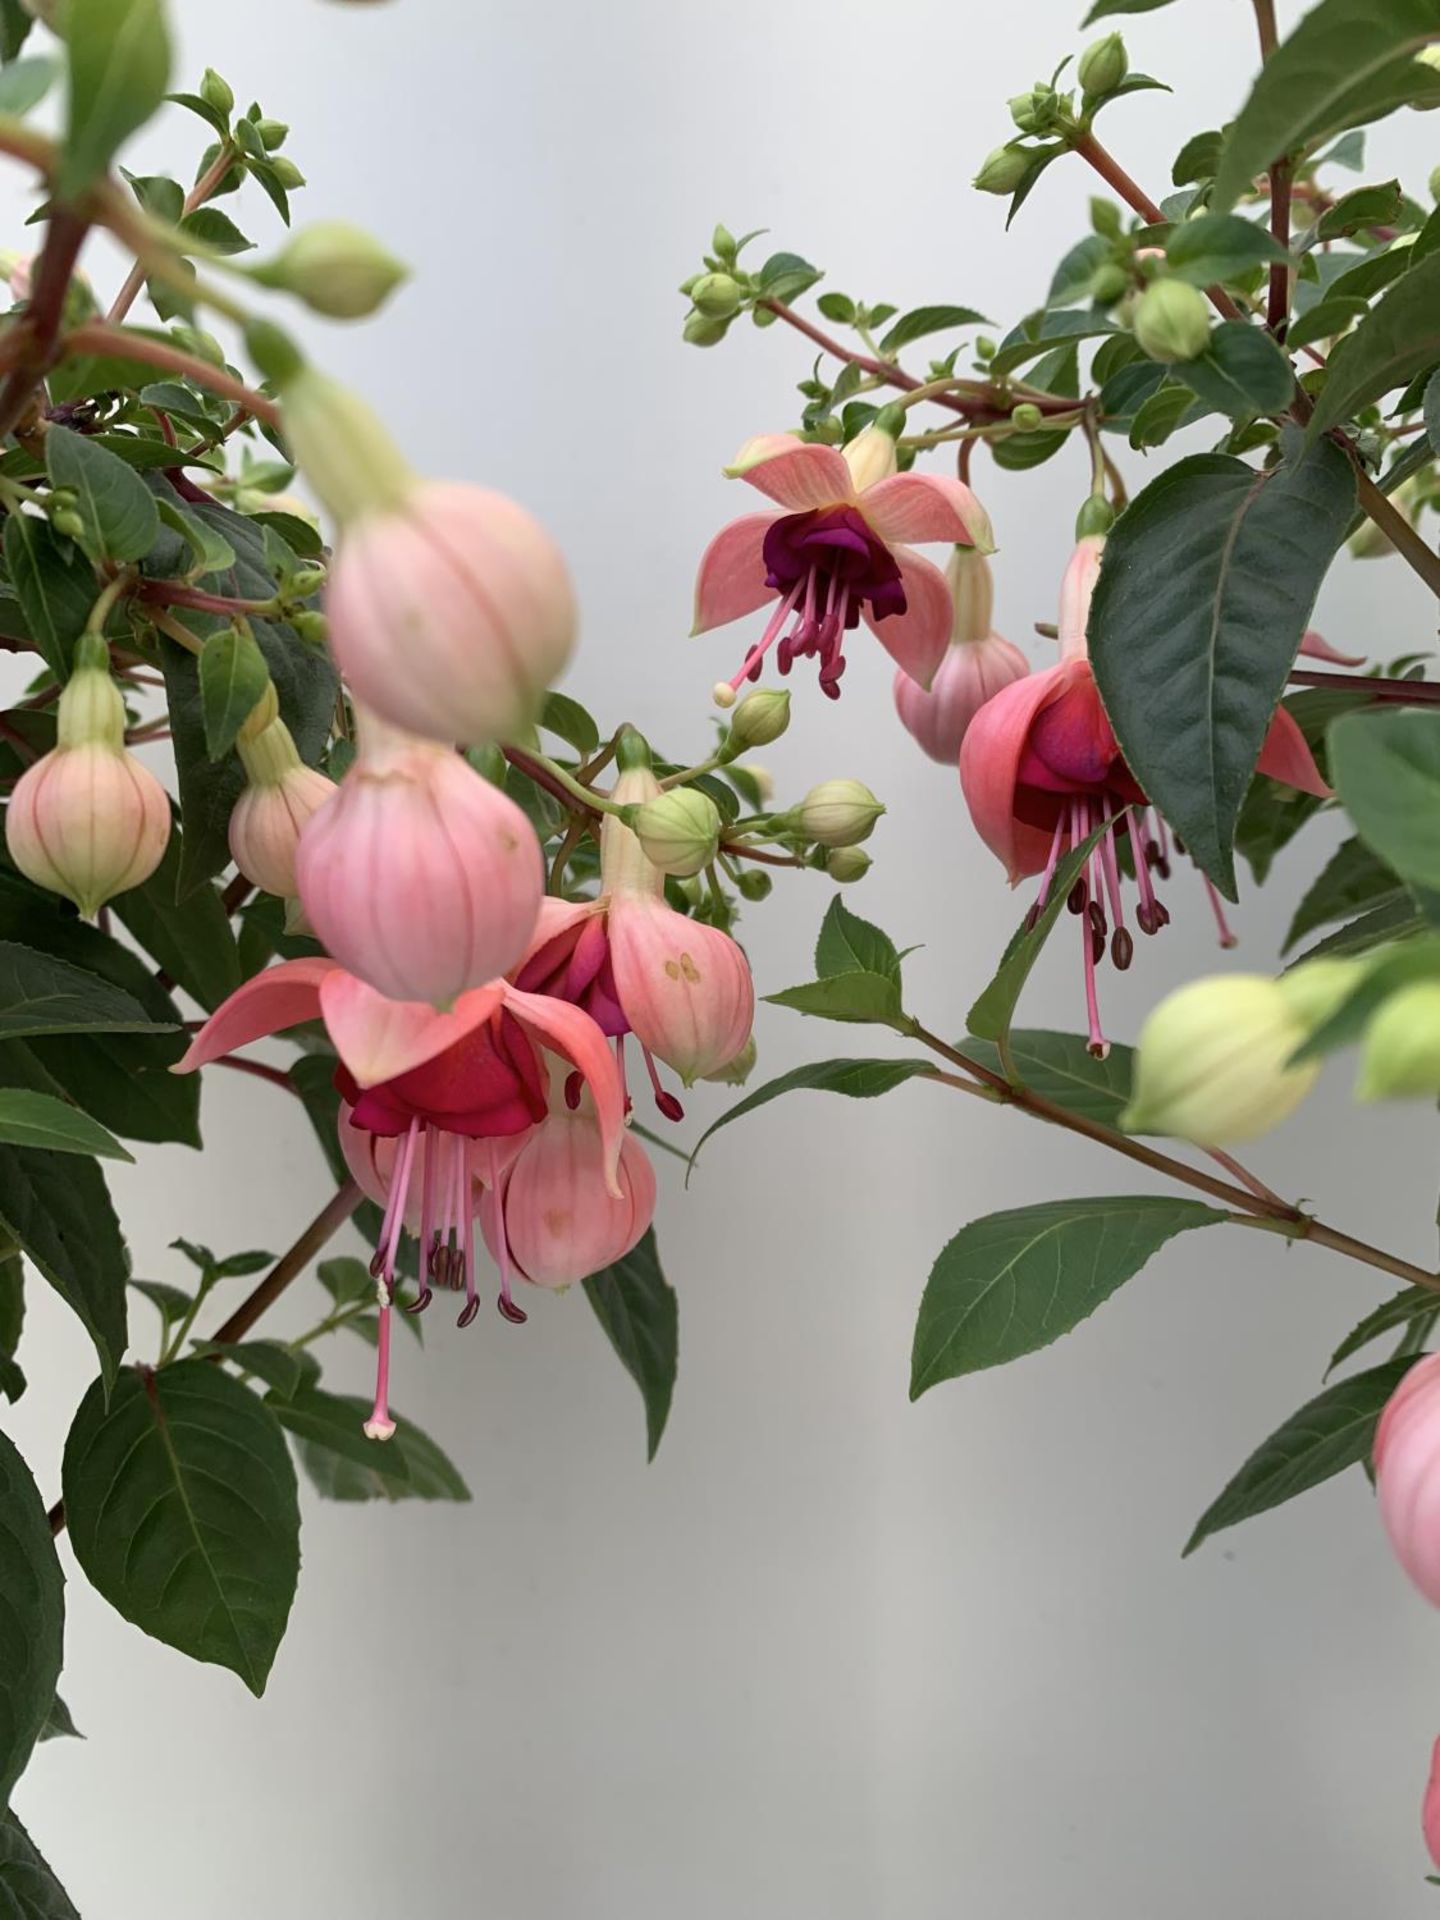 TWO BELLA STANDARD PINK FUCHSIA IN A 3 LTR POTS 70CM -80CM TALL TO BE SOLD FOR THE TWO PLUS VAT - Image 3 of 5